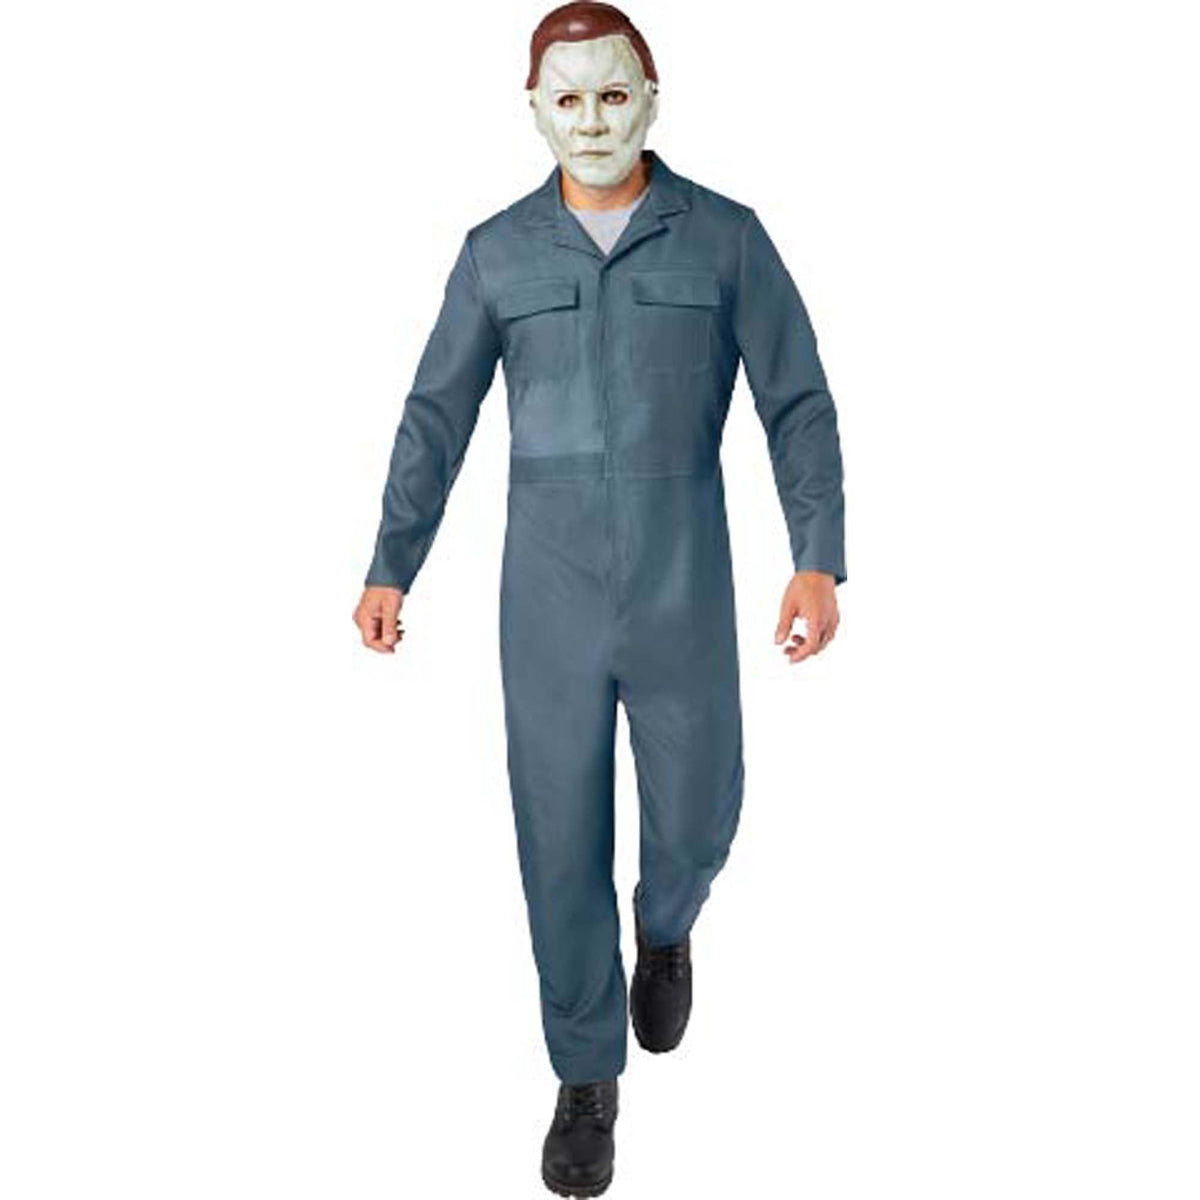 RUBIES II (Ruby Slipper Sales) Costumes Halloween II Michael Myers Costume for Adults, Gray Jumpsuit